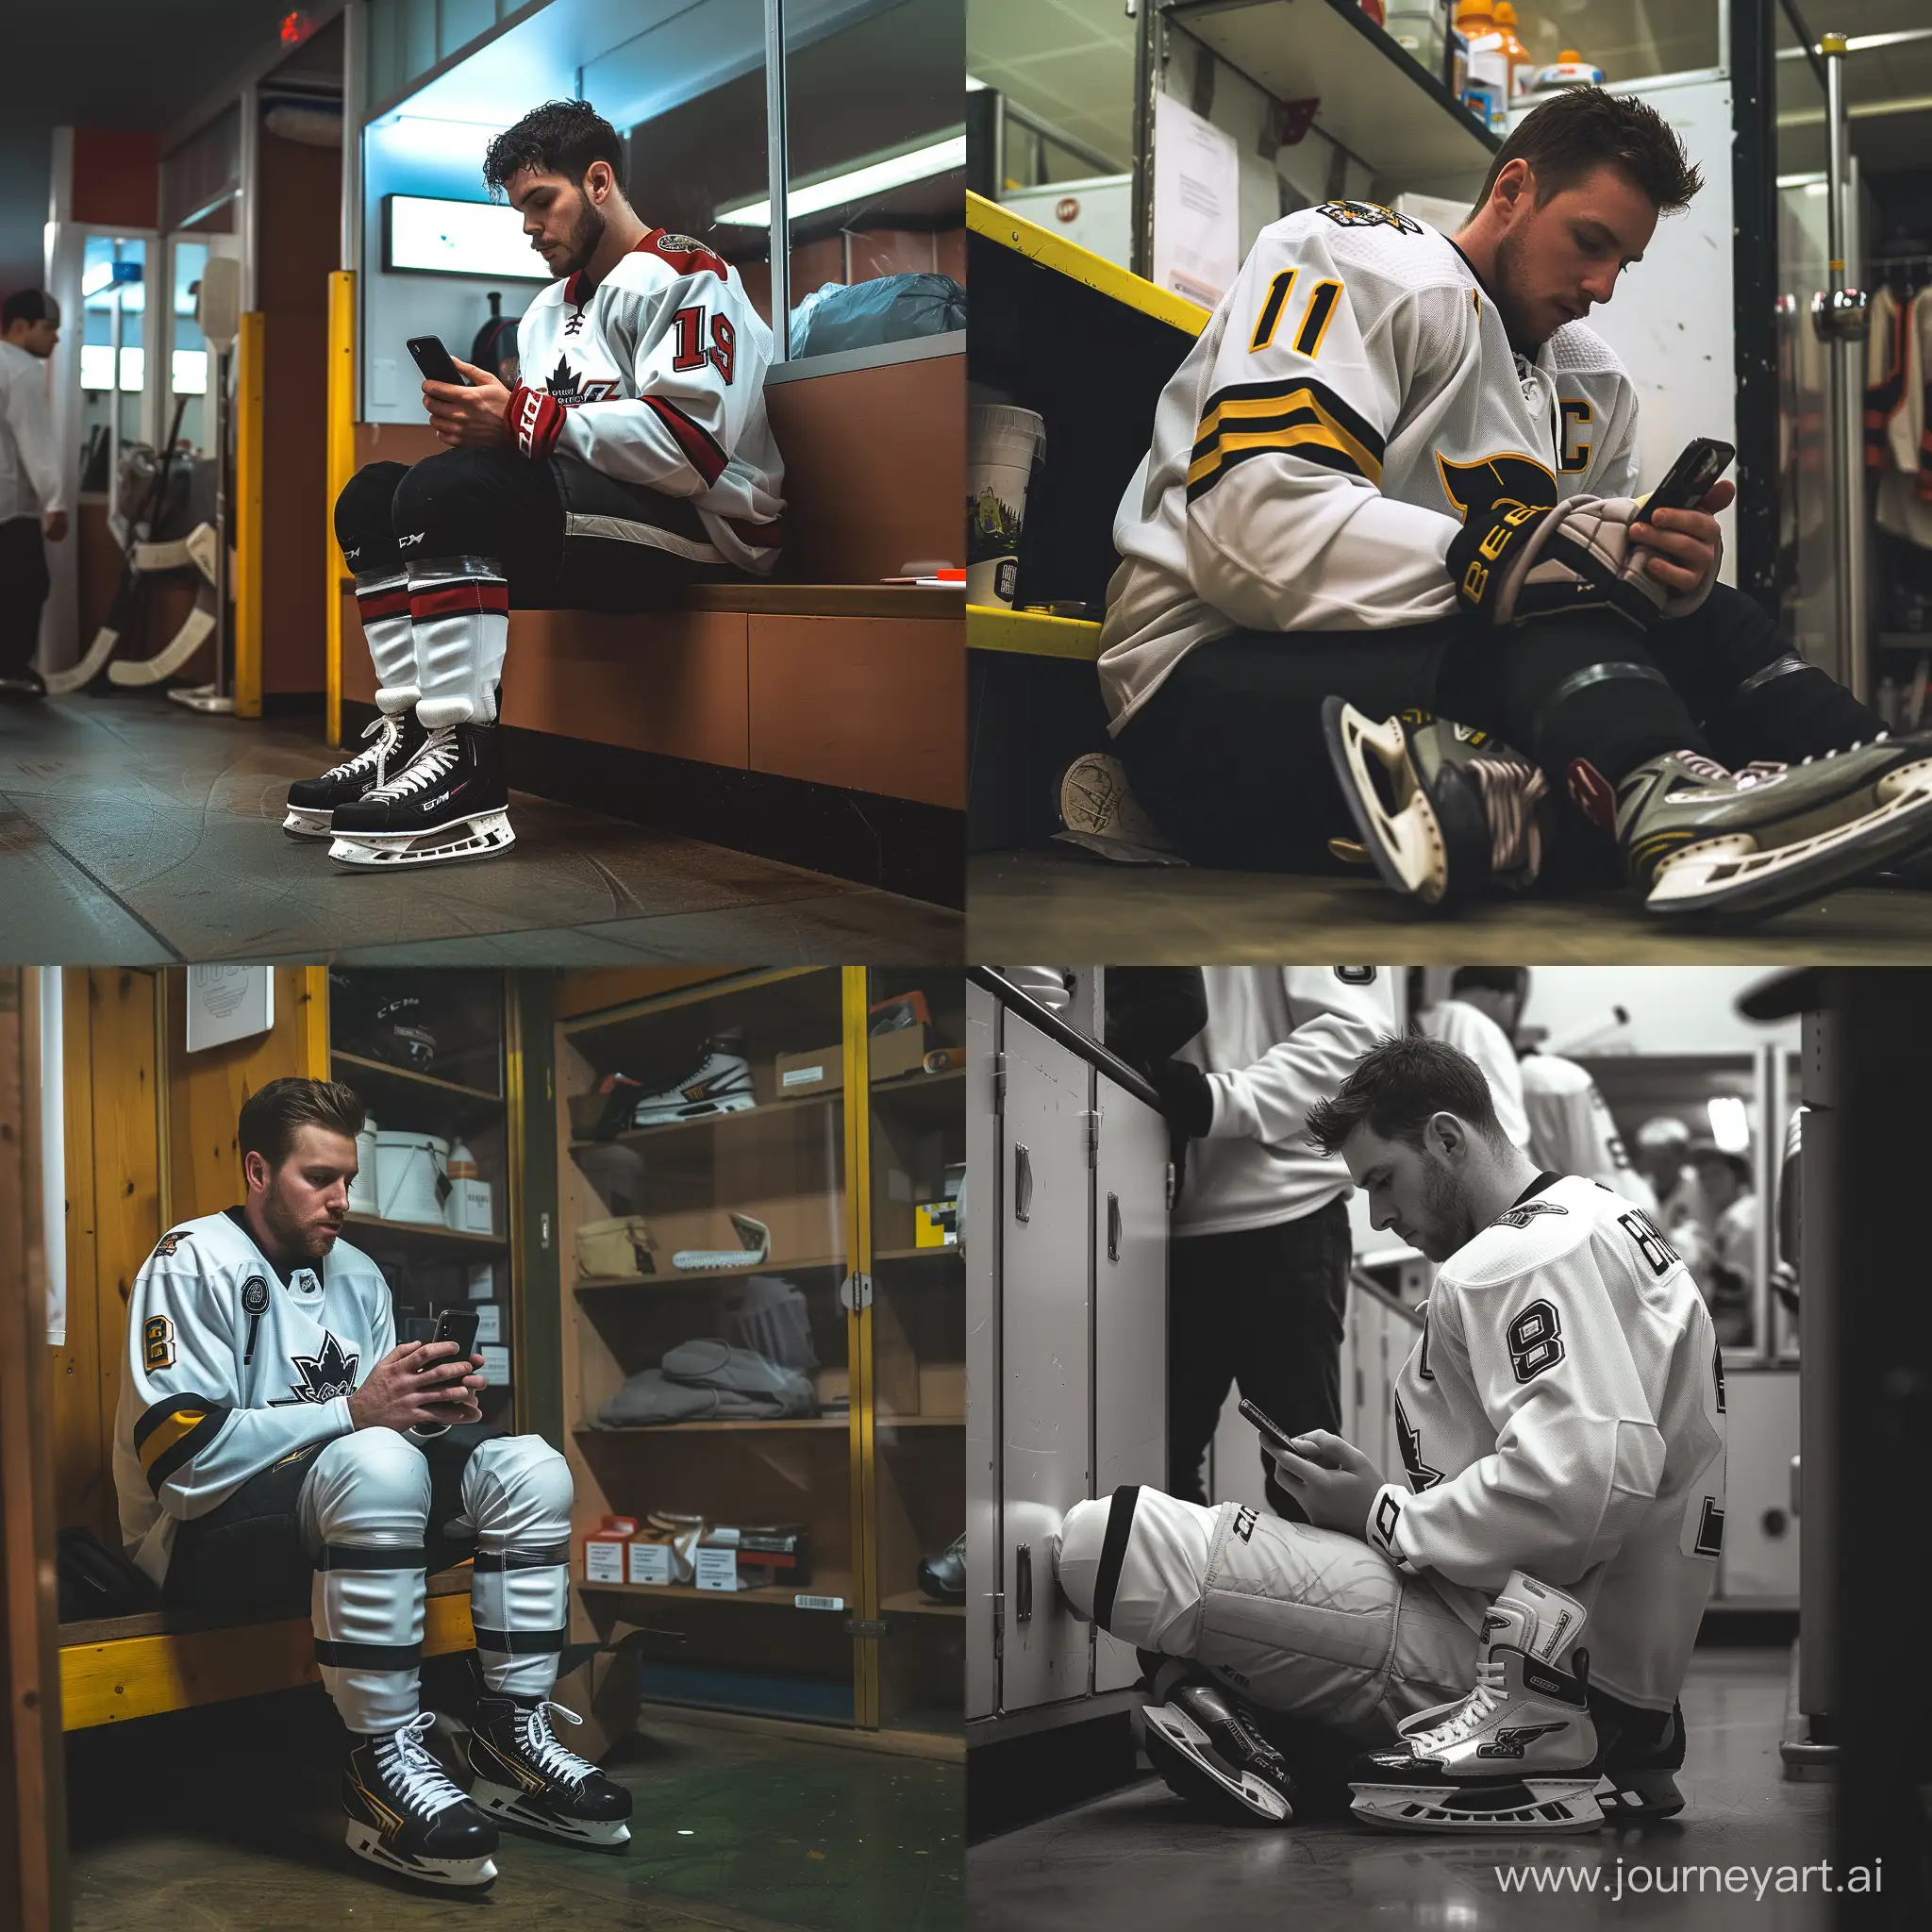 hockey player sitting in the locker room on his phone with his sneakers on